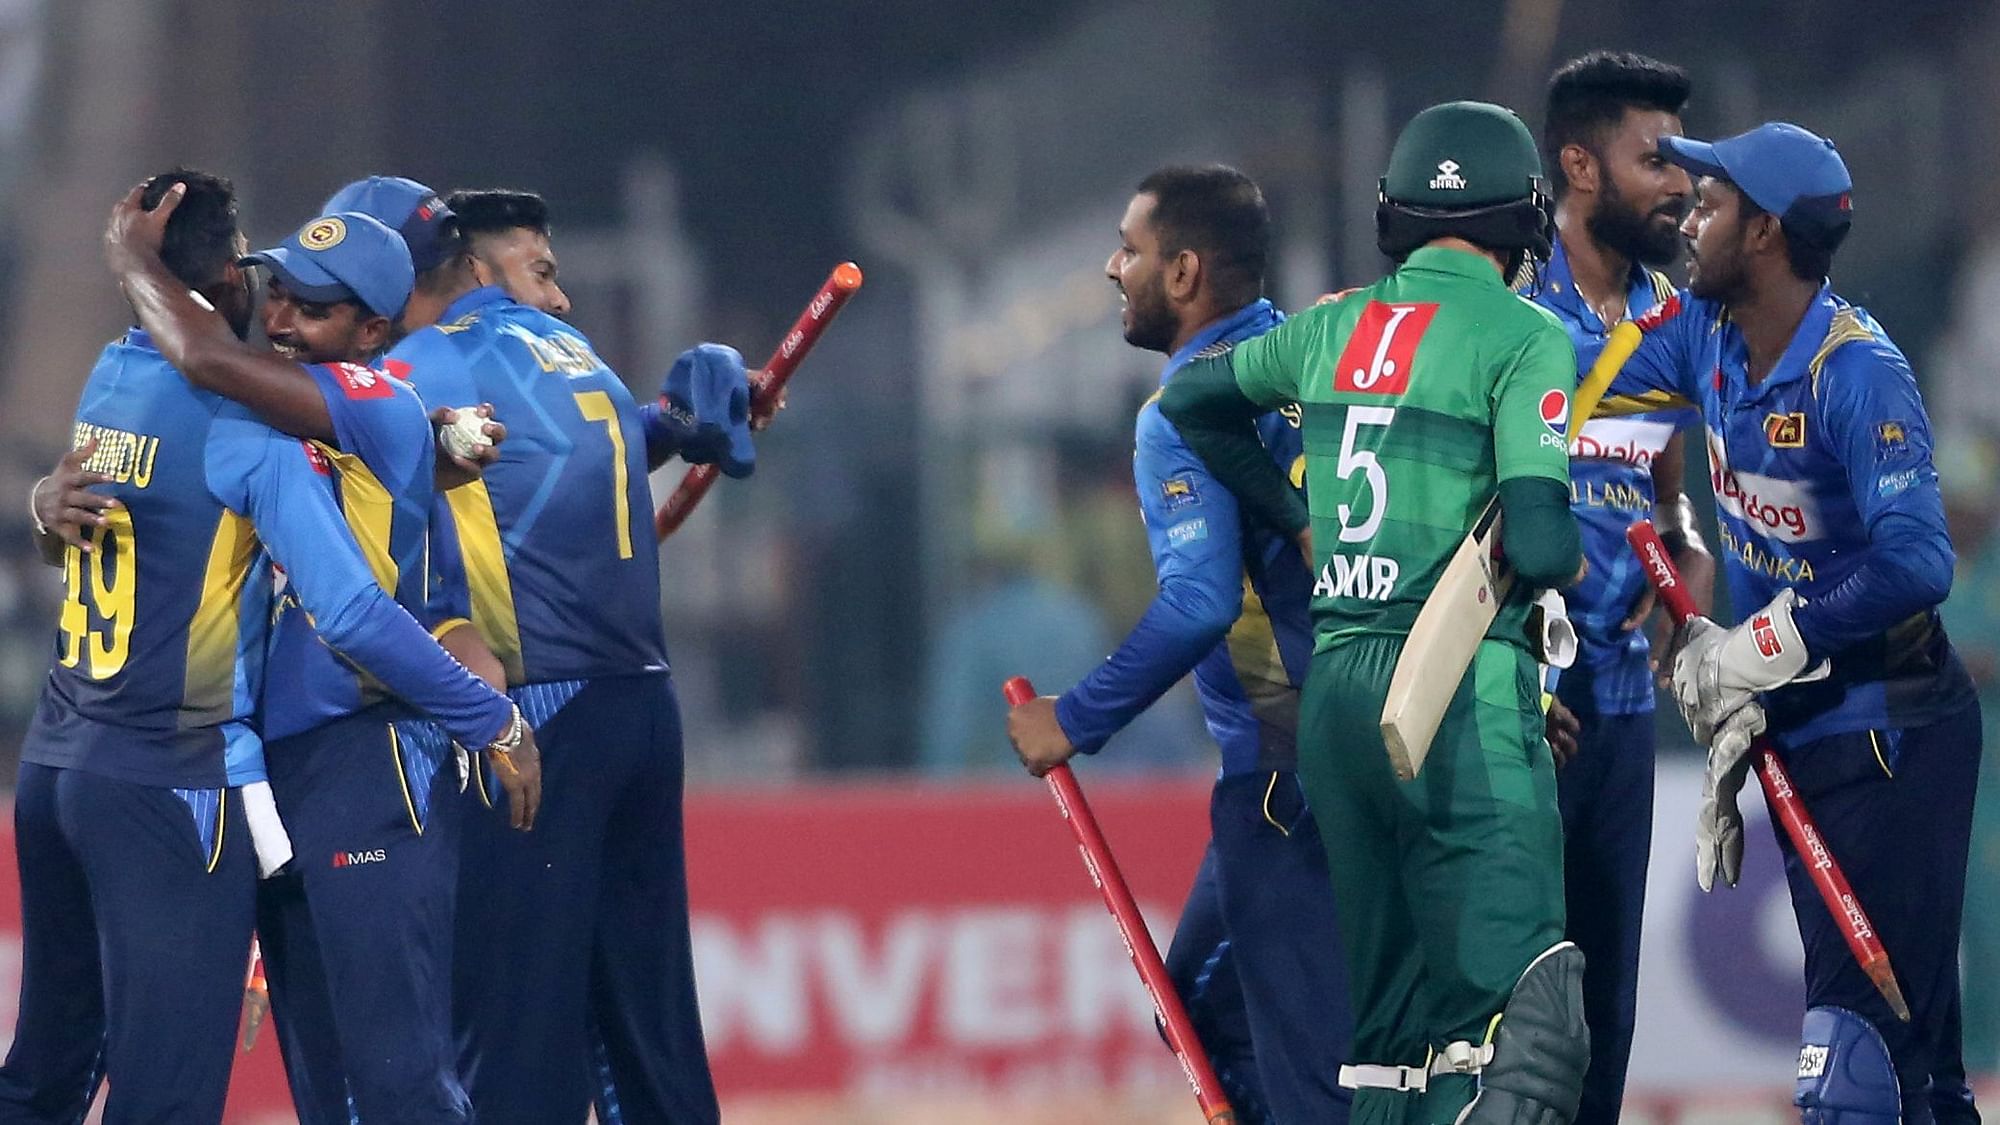 Sri Lankan players celebrate their victory against Pakistan in the second Twenty20 match in Lahore, Pakistan, Monday, Oct. 7, 2019.&nbsp;